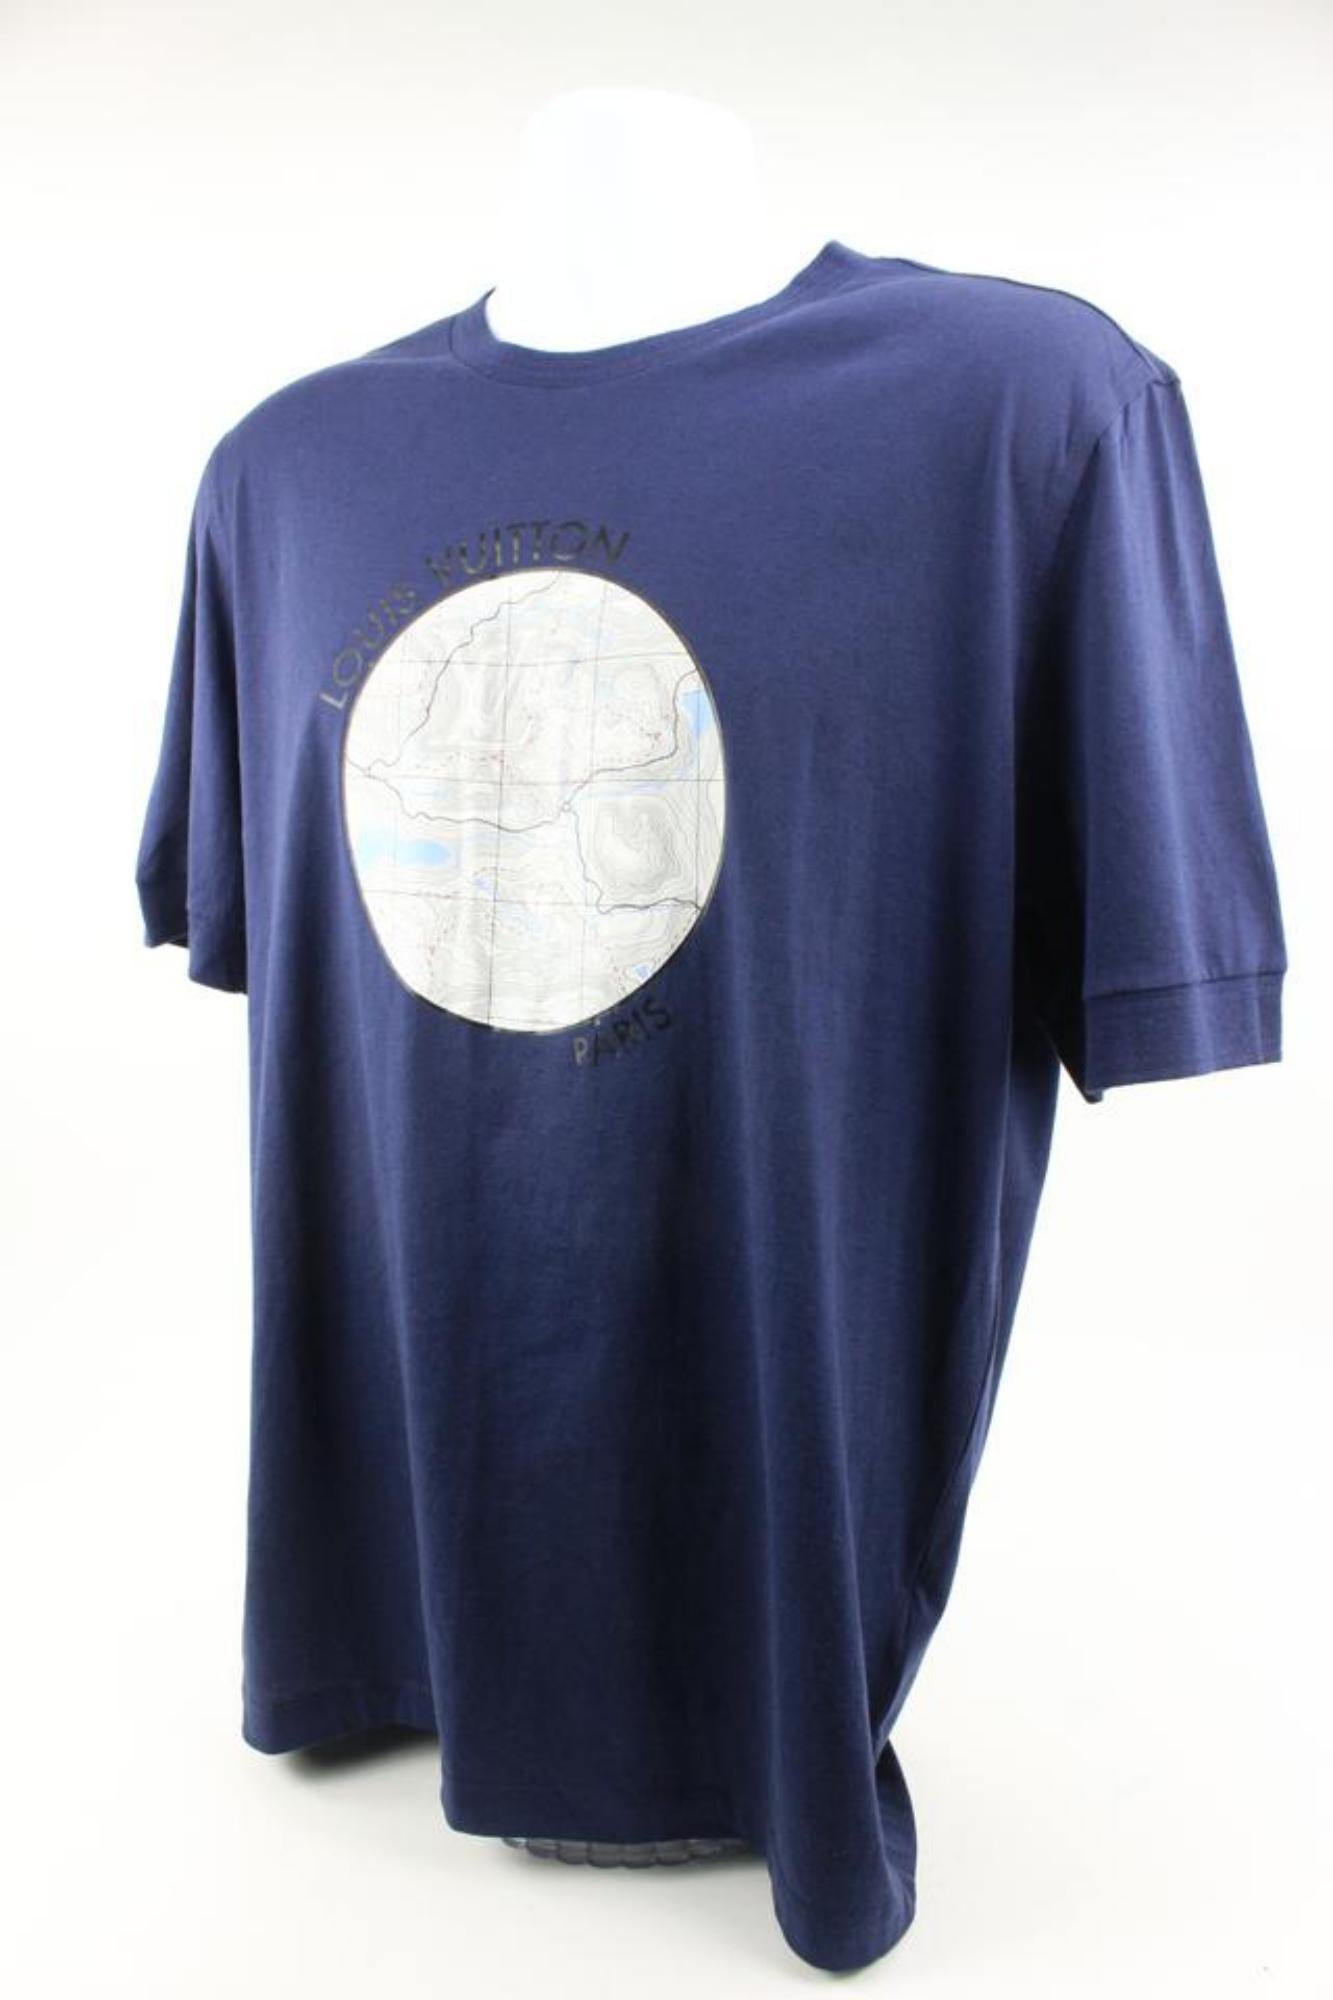 Louis Vuitton Men's Large Navy Paris Topographical Map Globe T-Shirt Tee Sh125lv In Good Condition For Sale In Dix hills, NY